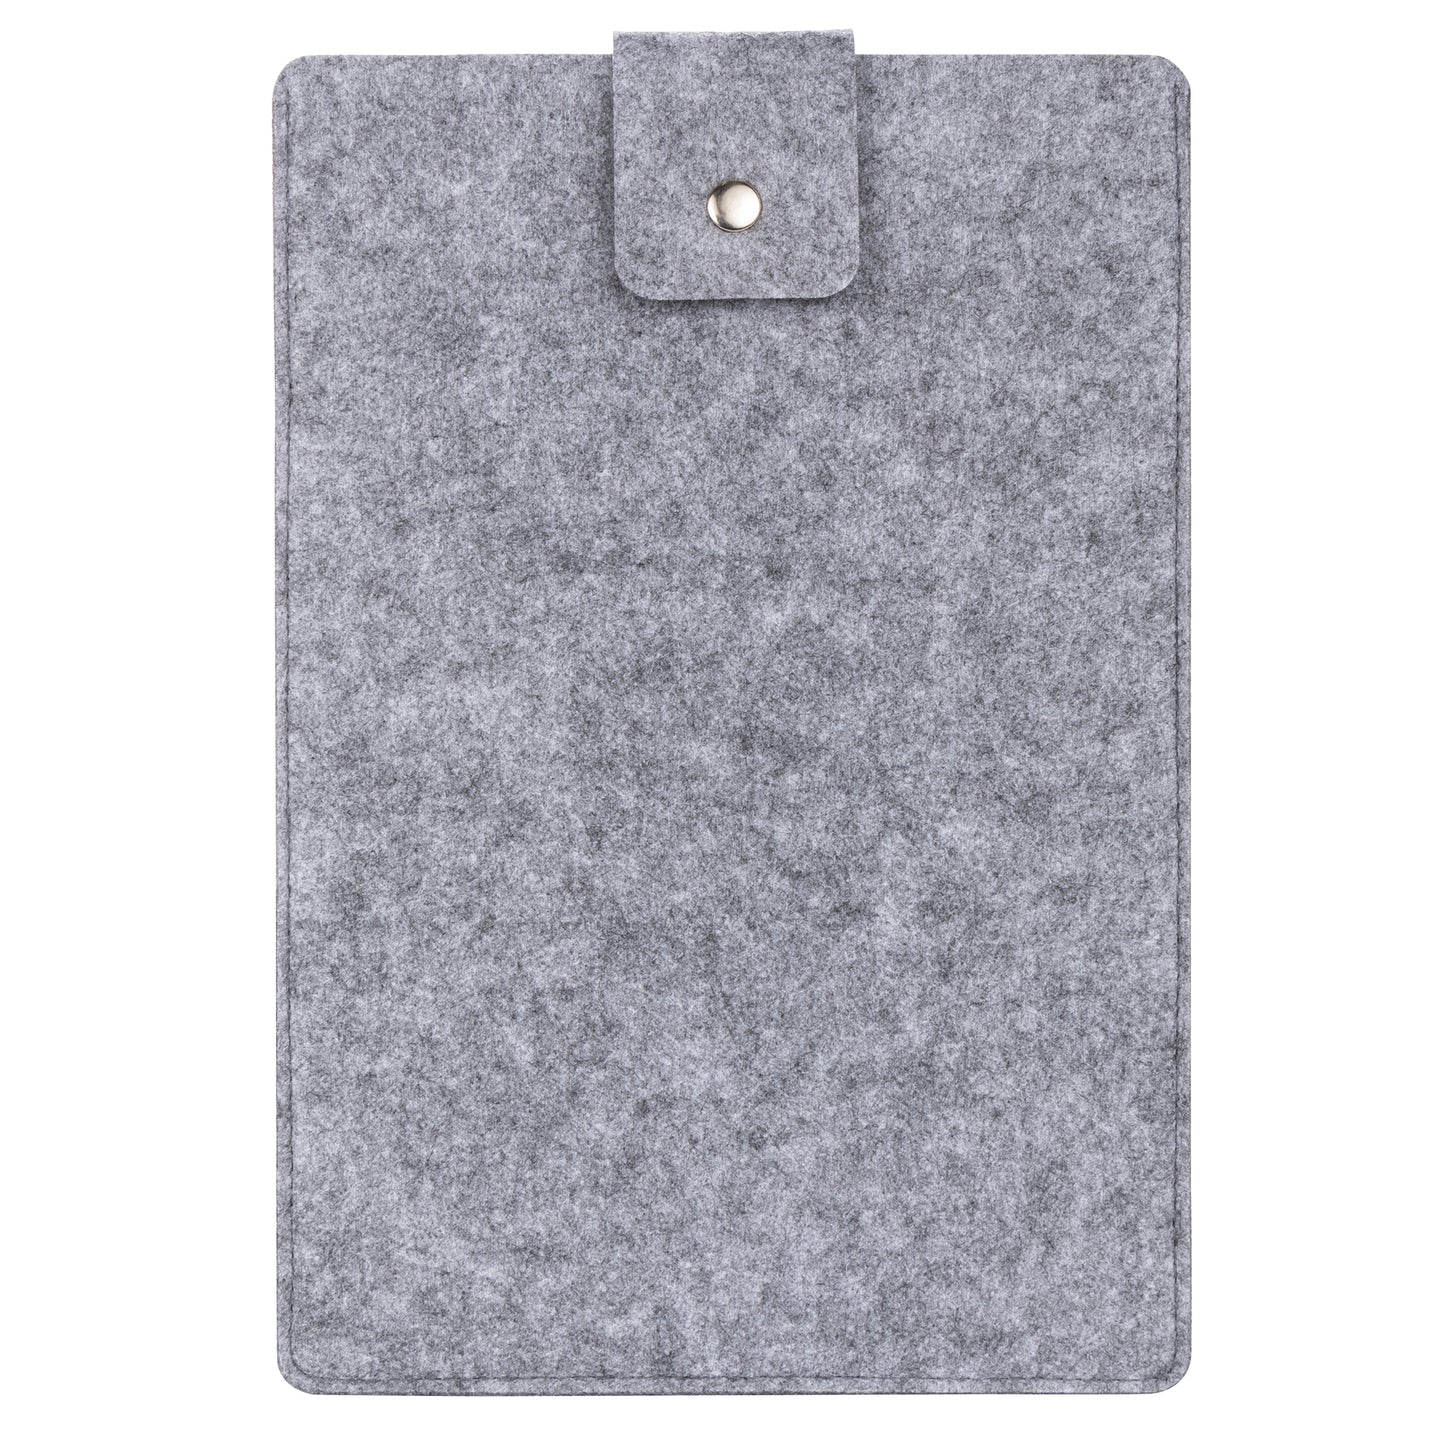 Light Gray Felt Tablet Sleeve Carrying Case - front view with snap